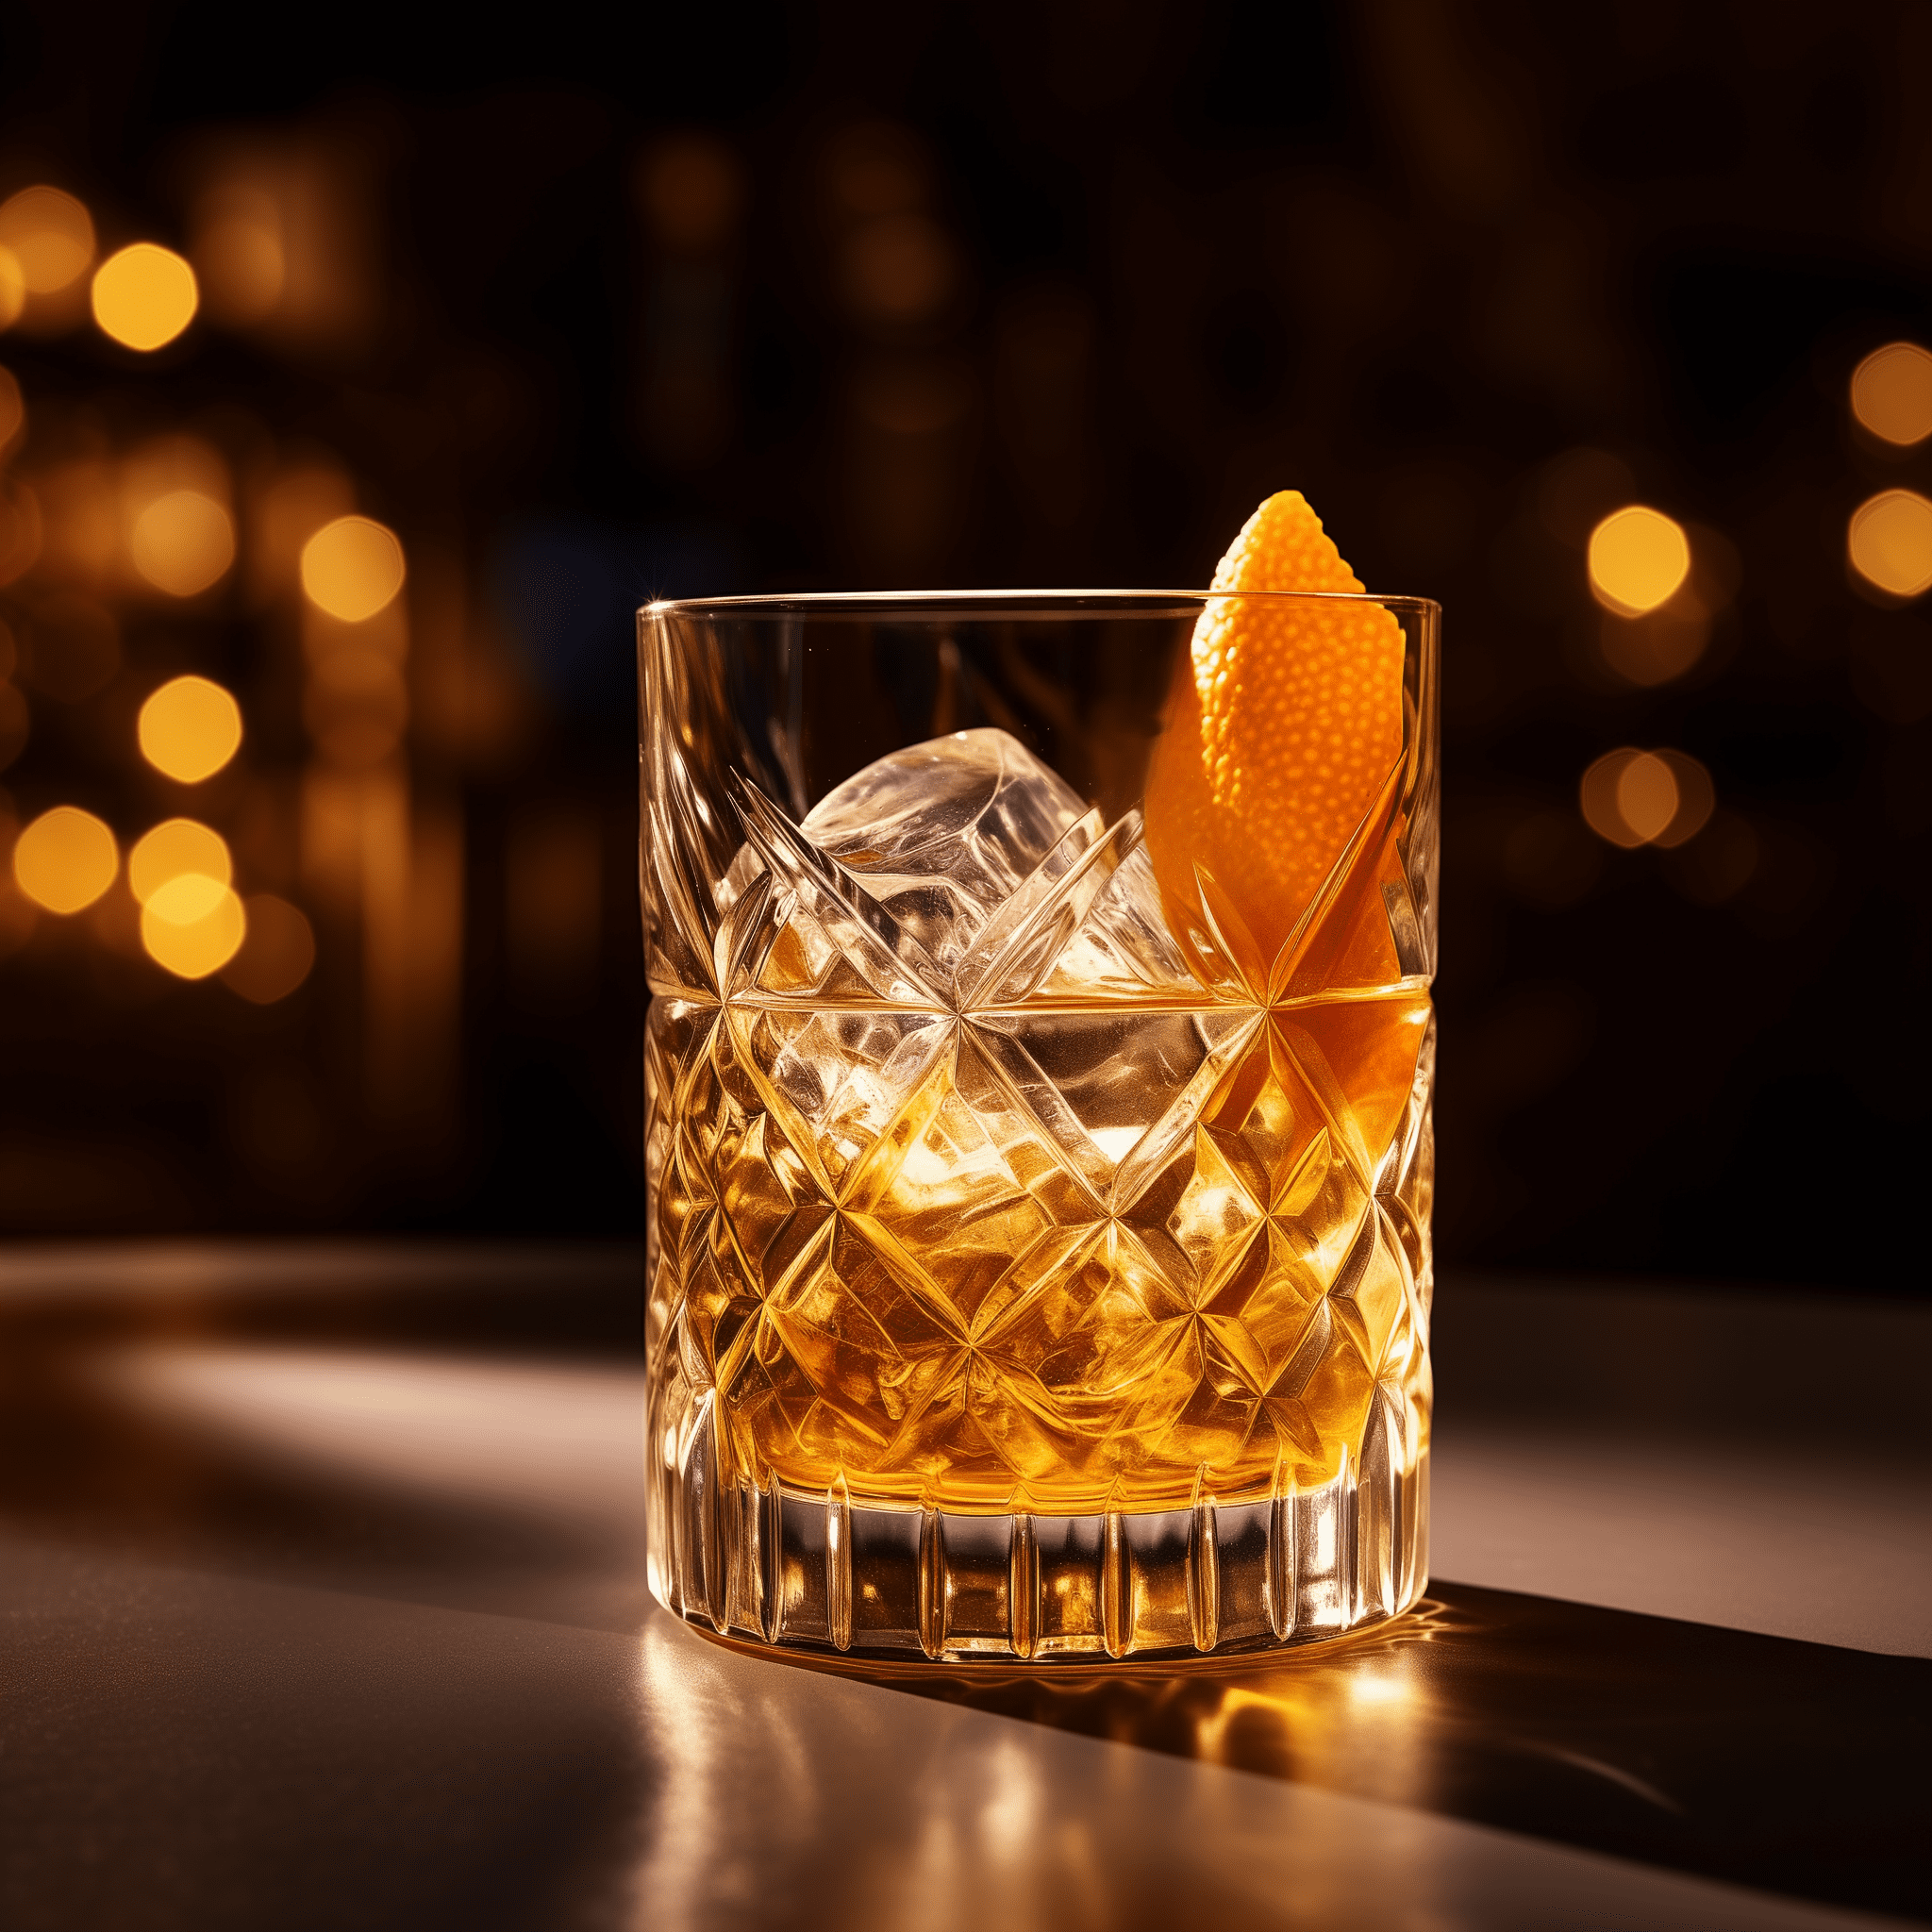 Italian Old Fashioned Cocktail Recipe - The Italian Old Fashioned has a complex taste profile. It's bittersweet with herbal undertones from the Amaro, the whiskey provides warmth and depth, and the Prosecco adds a light, bubbly finish.